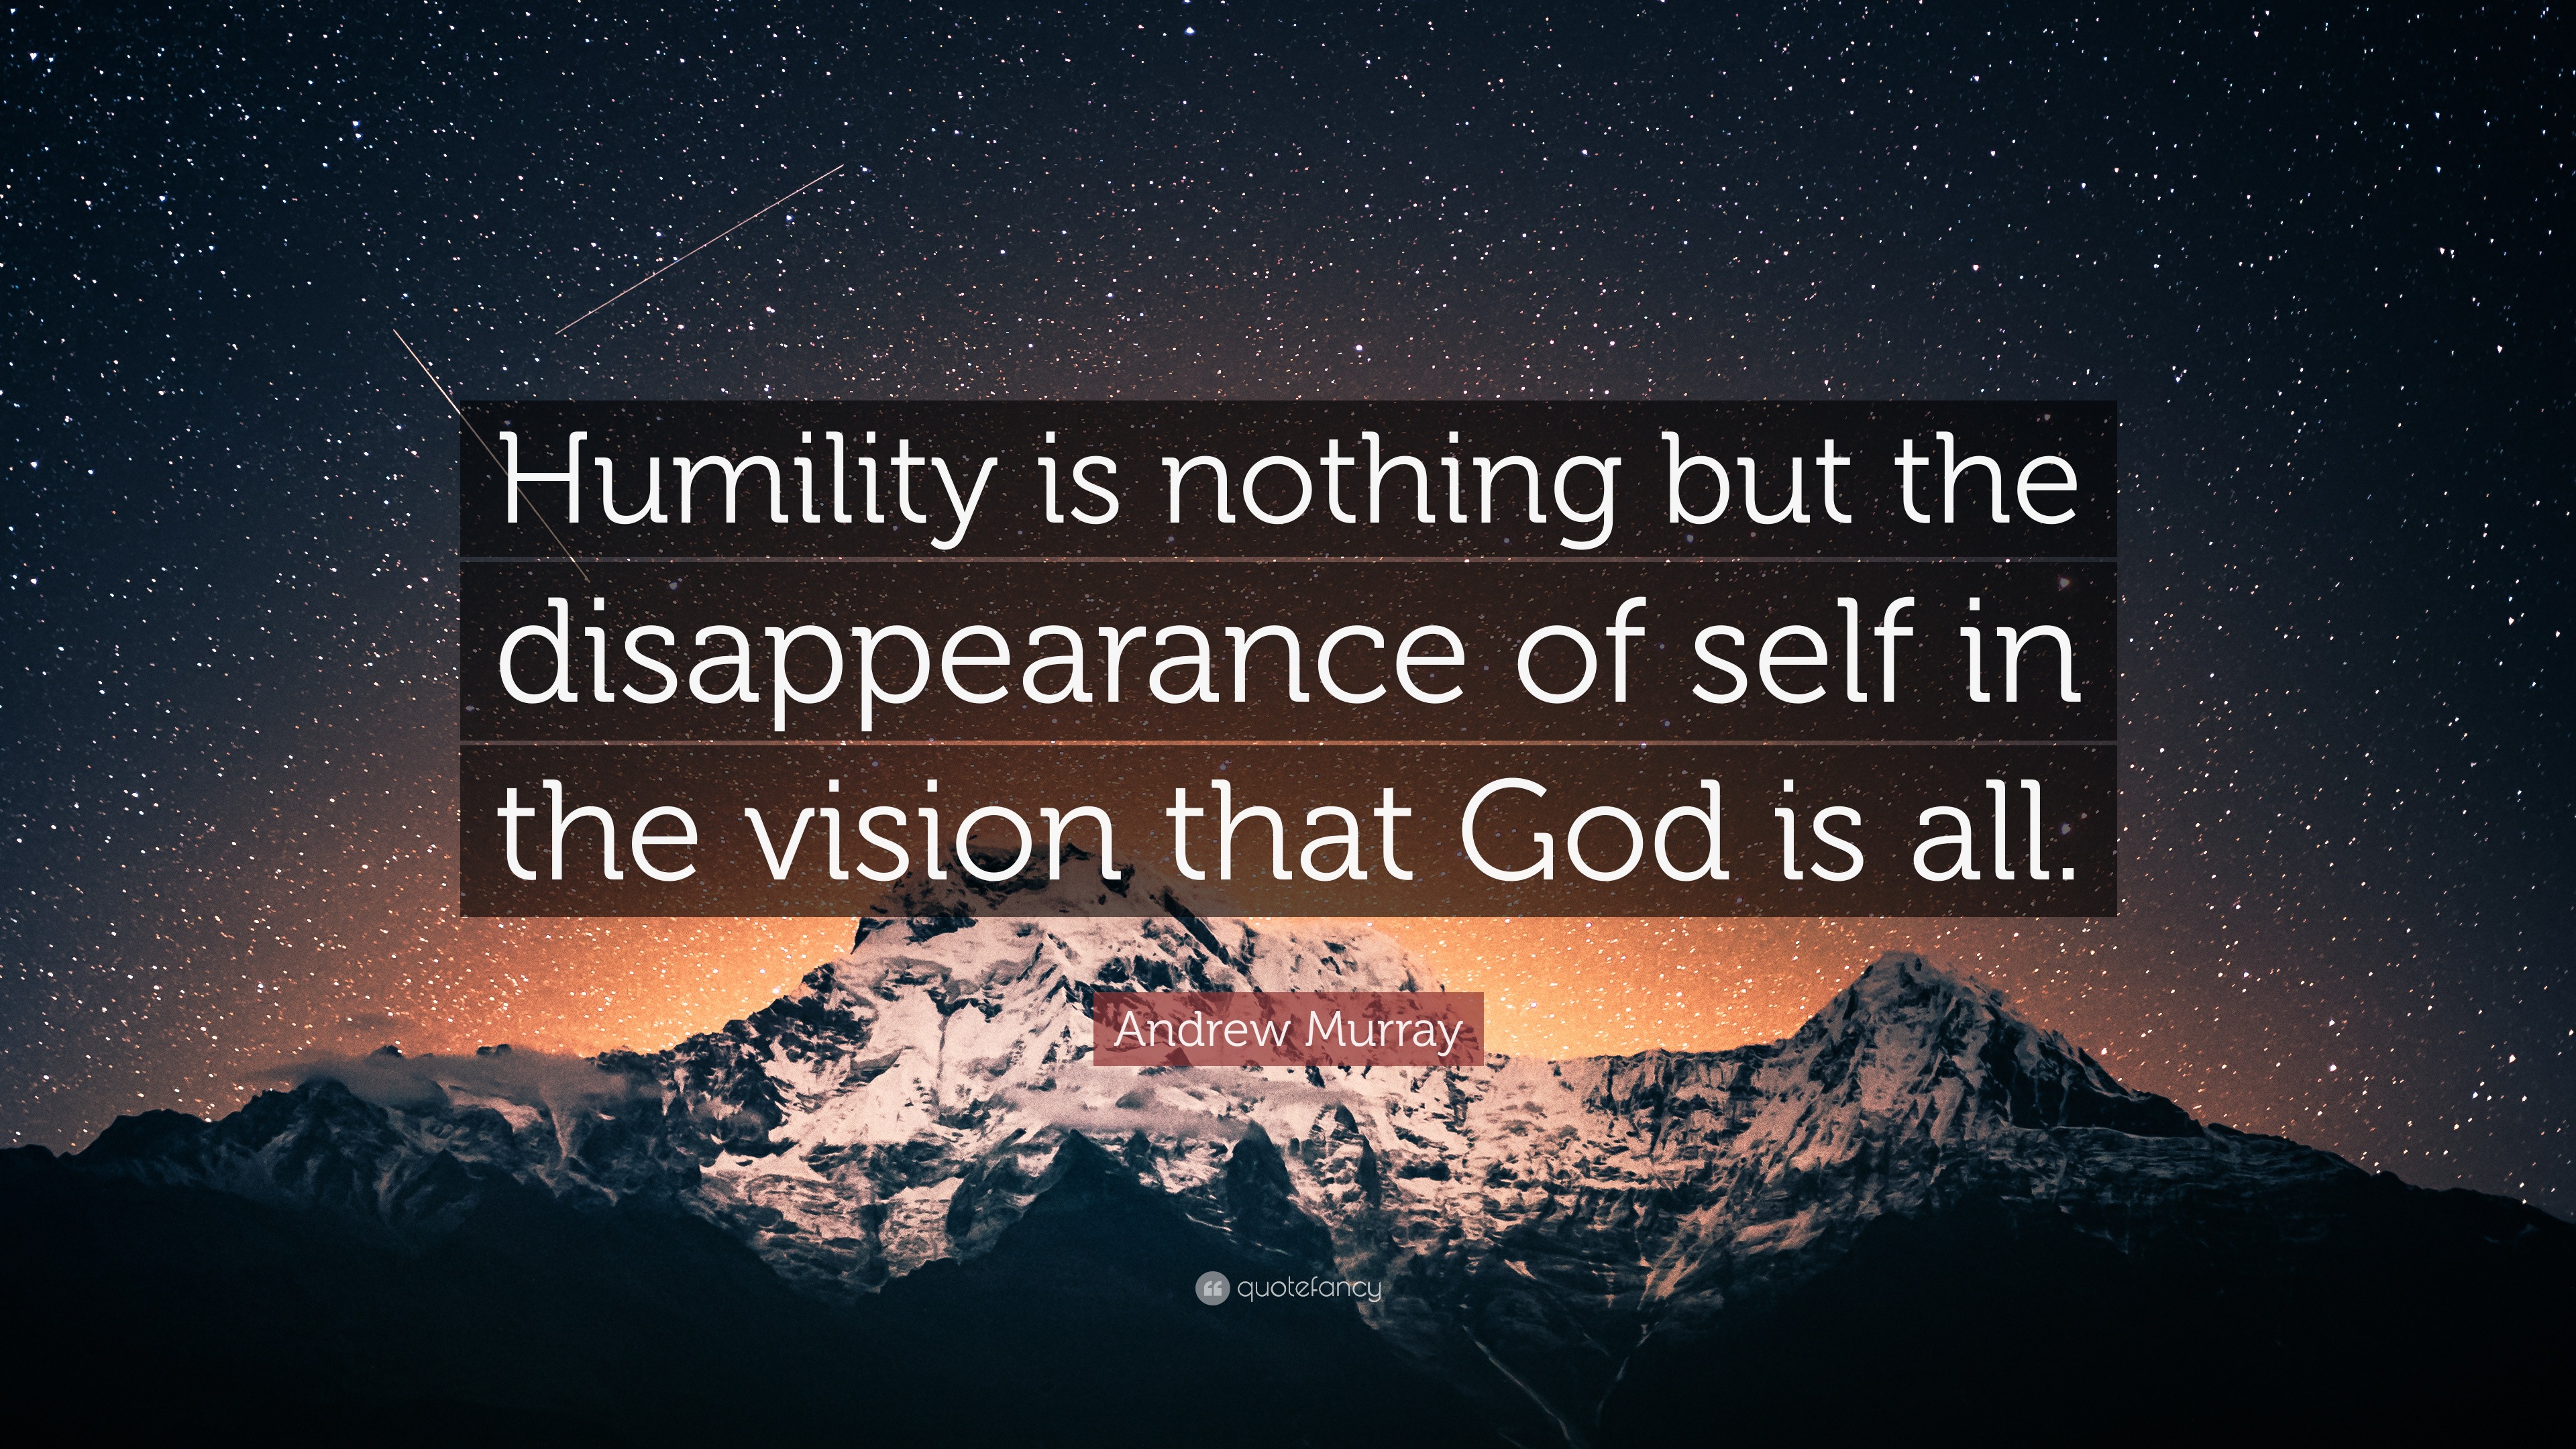 Andrew Murray Quote “Humility is nothing but the disappearance of self